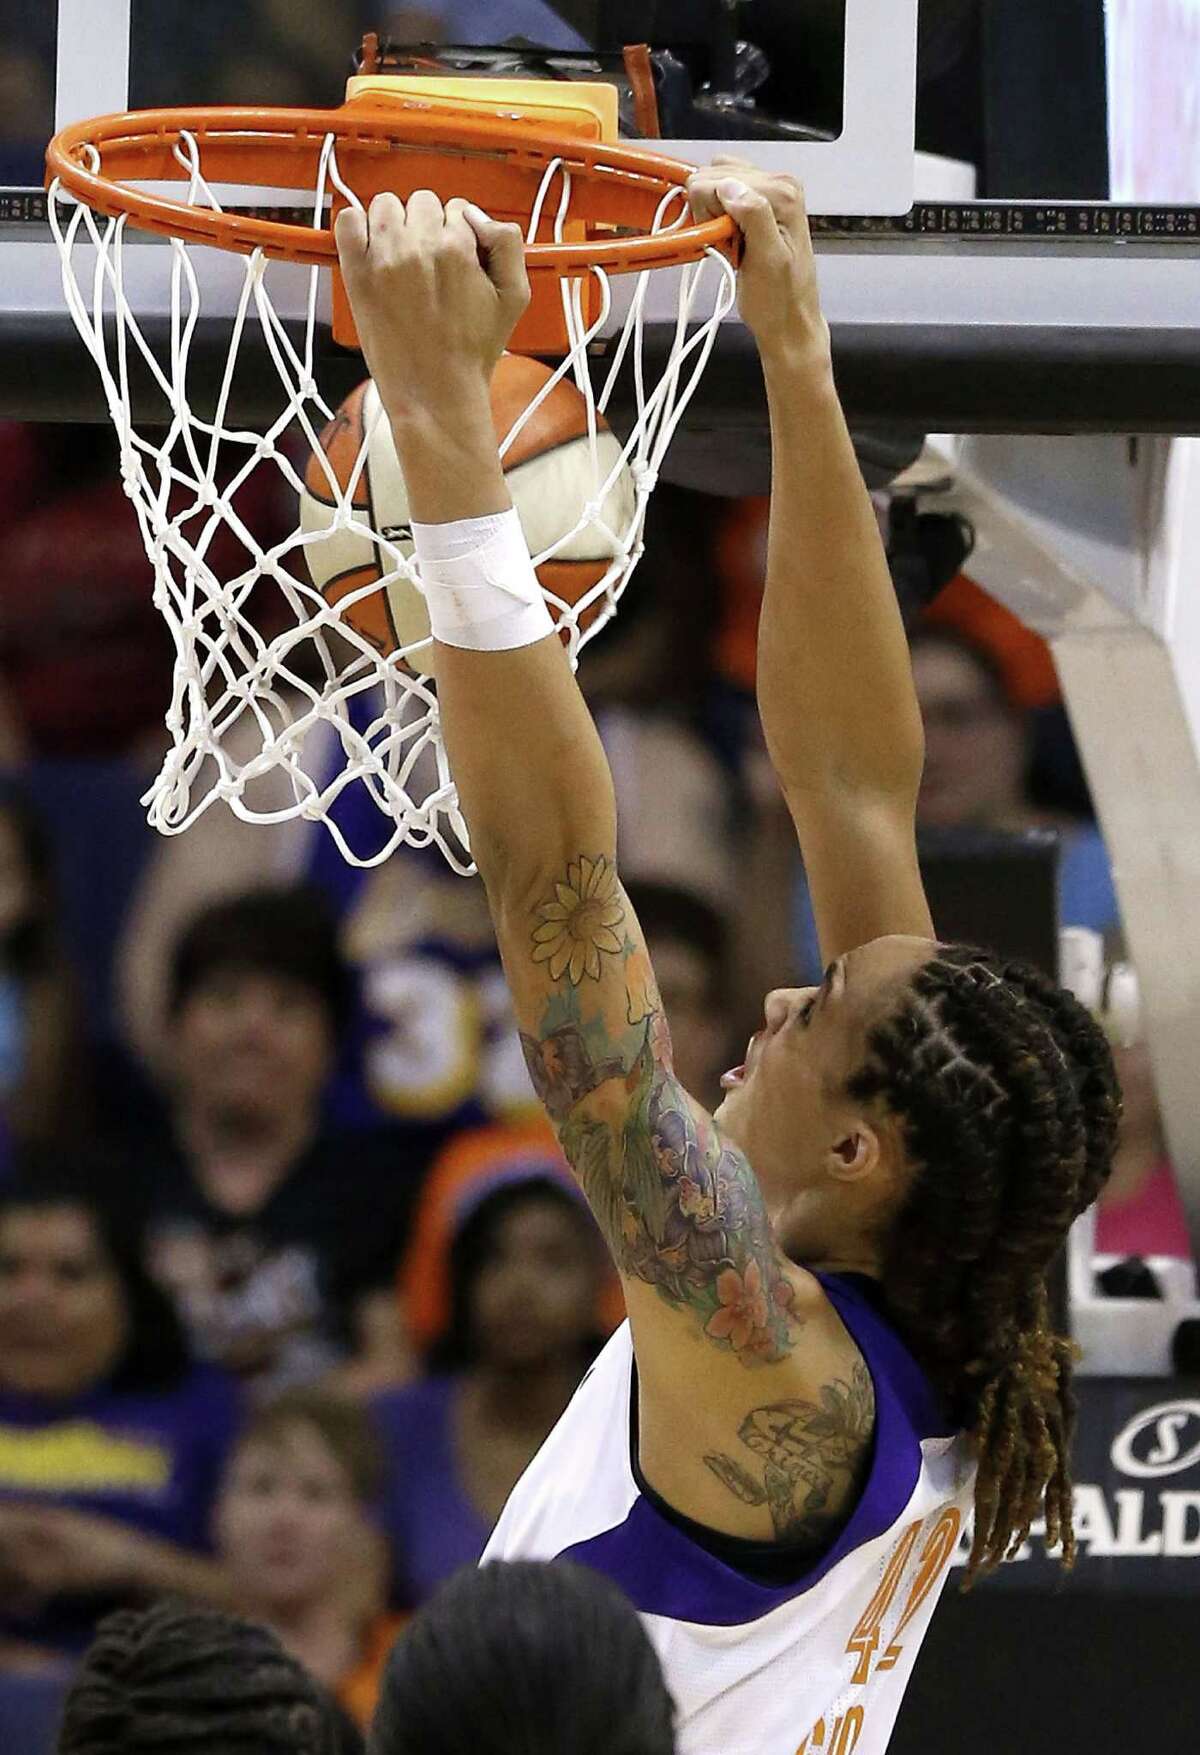 Phoenix Mercury's Brittney Griner goes in for a break away dunk against the Chicago Sky in the second half during a WNBA basketball game on Monday, May 27, 2013, in Phoenix. The Sky defeated the Mercury 102-80. (AP Photo/Ross D. Franklin)